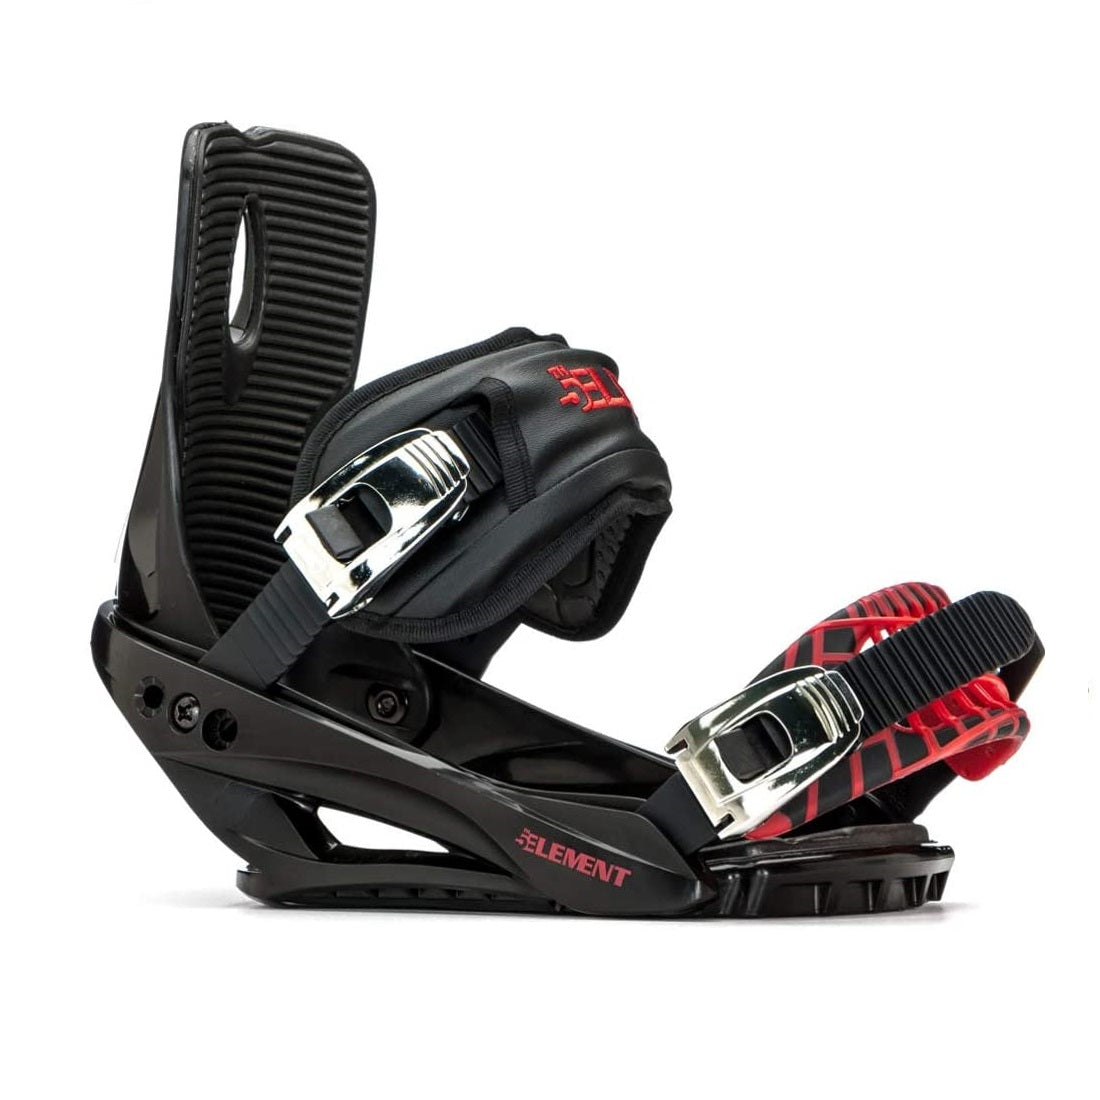 5th Element Grid ST-1 Complete Snowboard Package - Red/Black Black